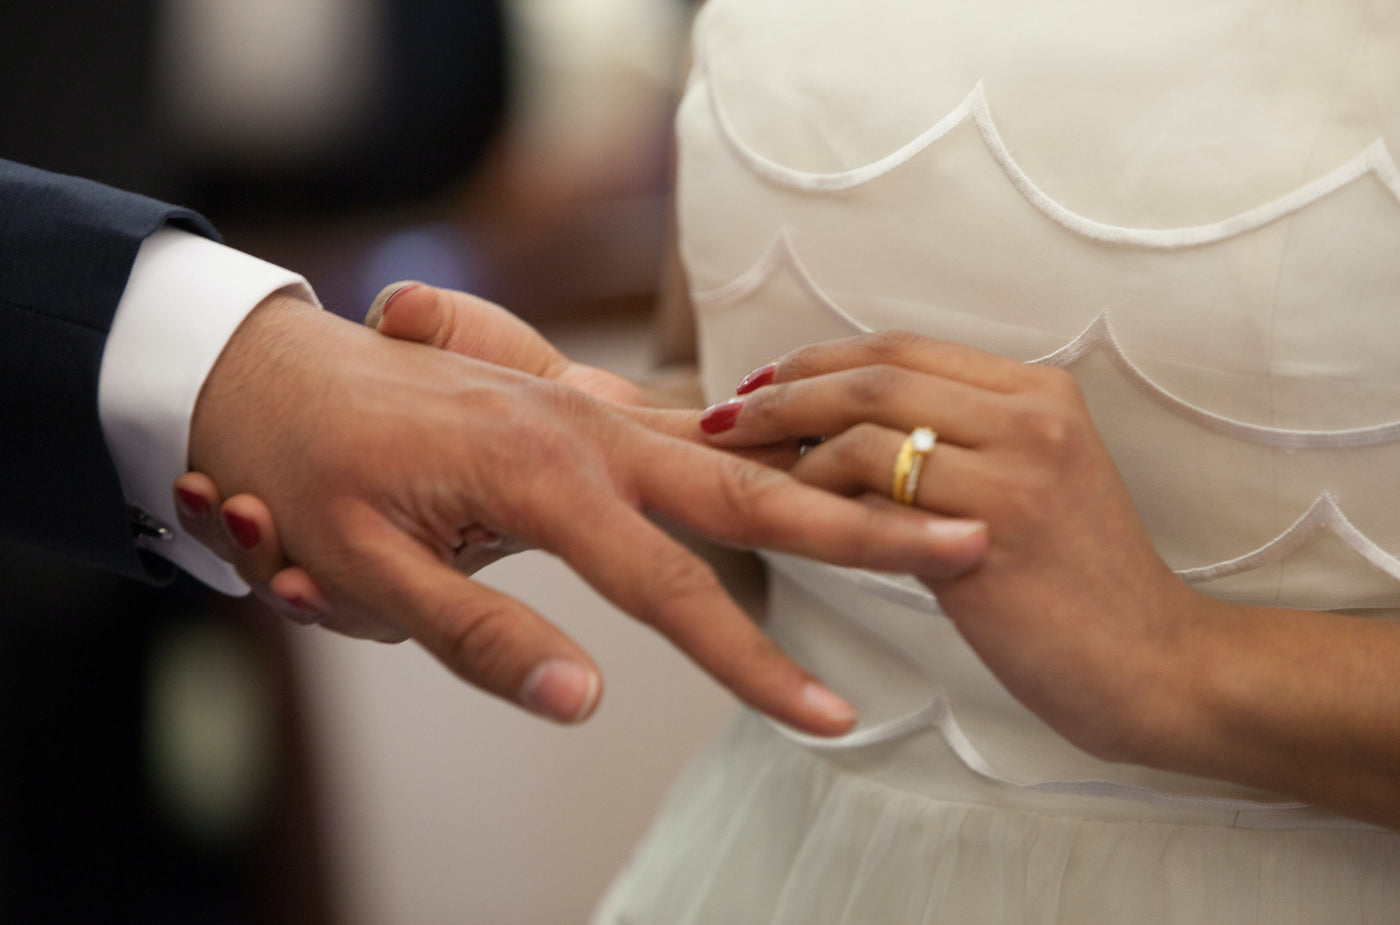 Close-up photo of a bride placing a wedding ring on the groom's finger.